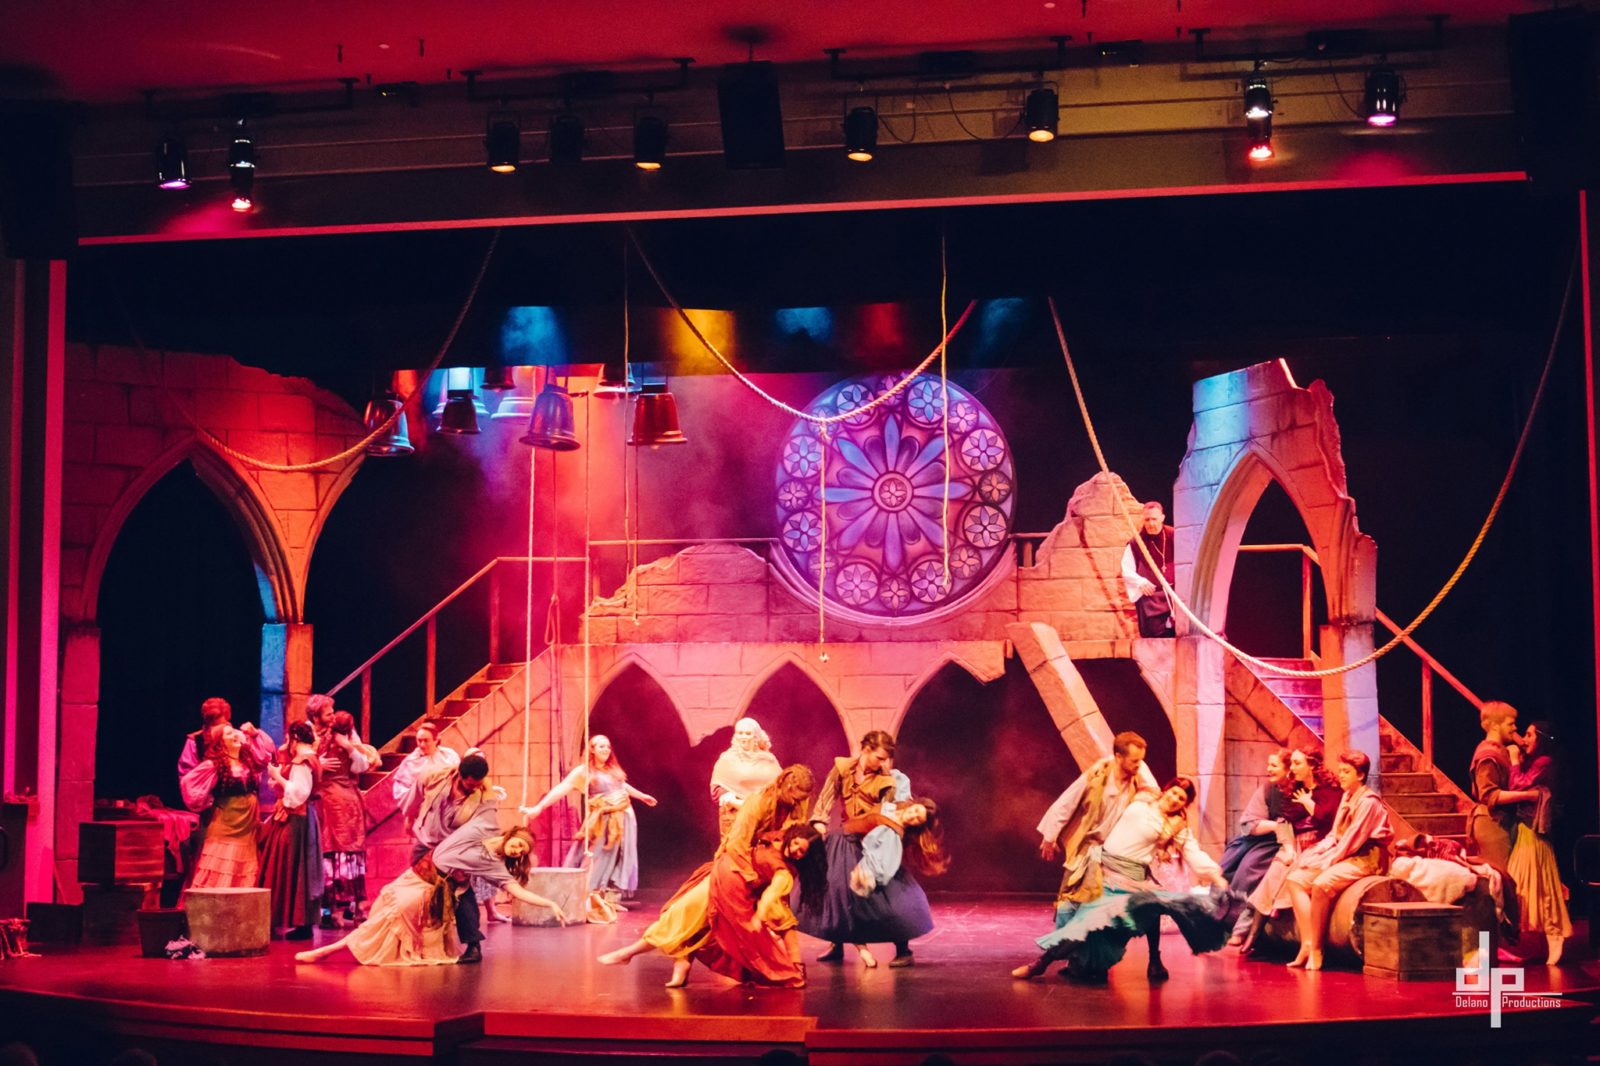 The Kroc Center's 2019 production of the Hunchback of Notre Dame